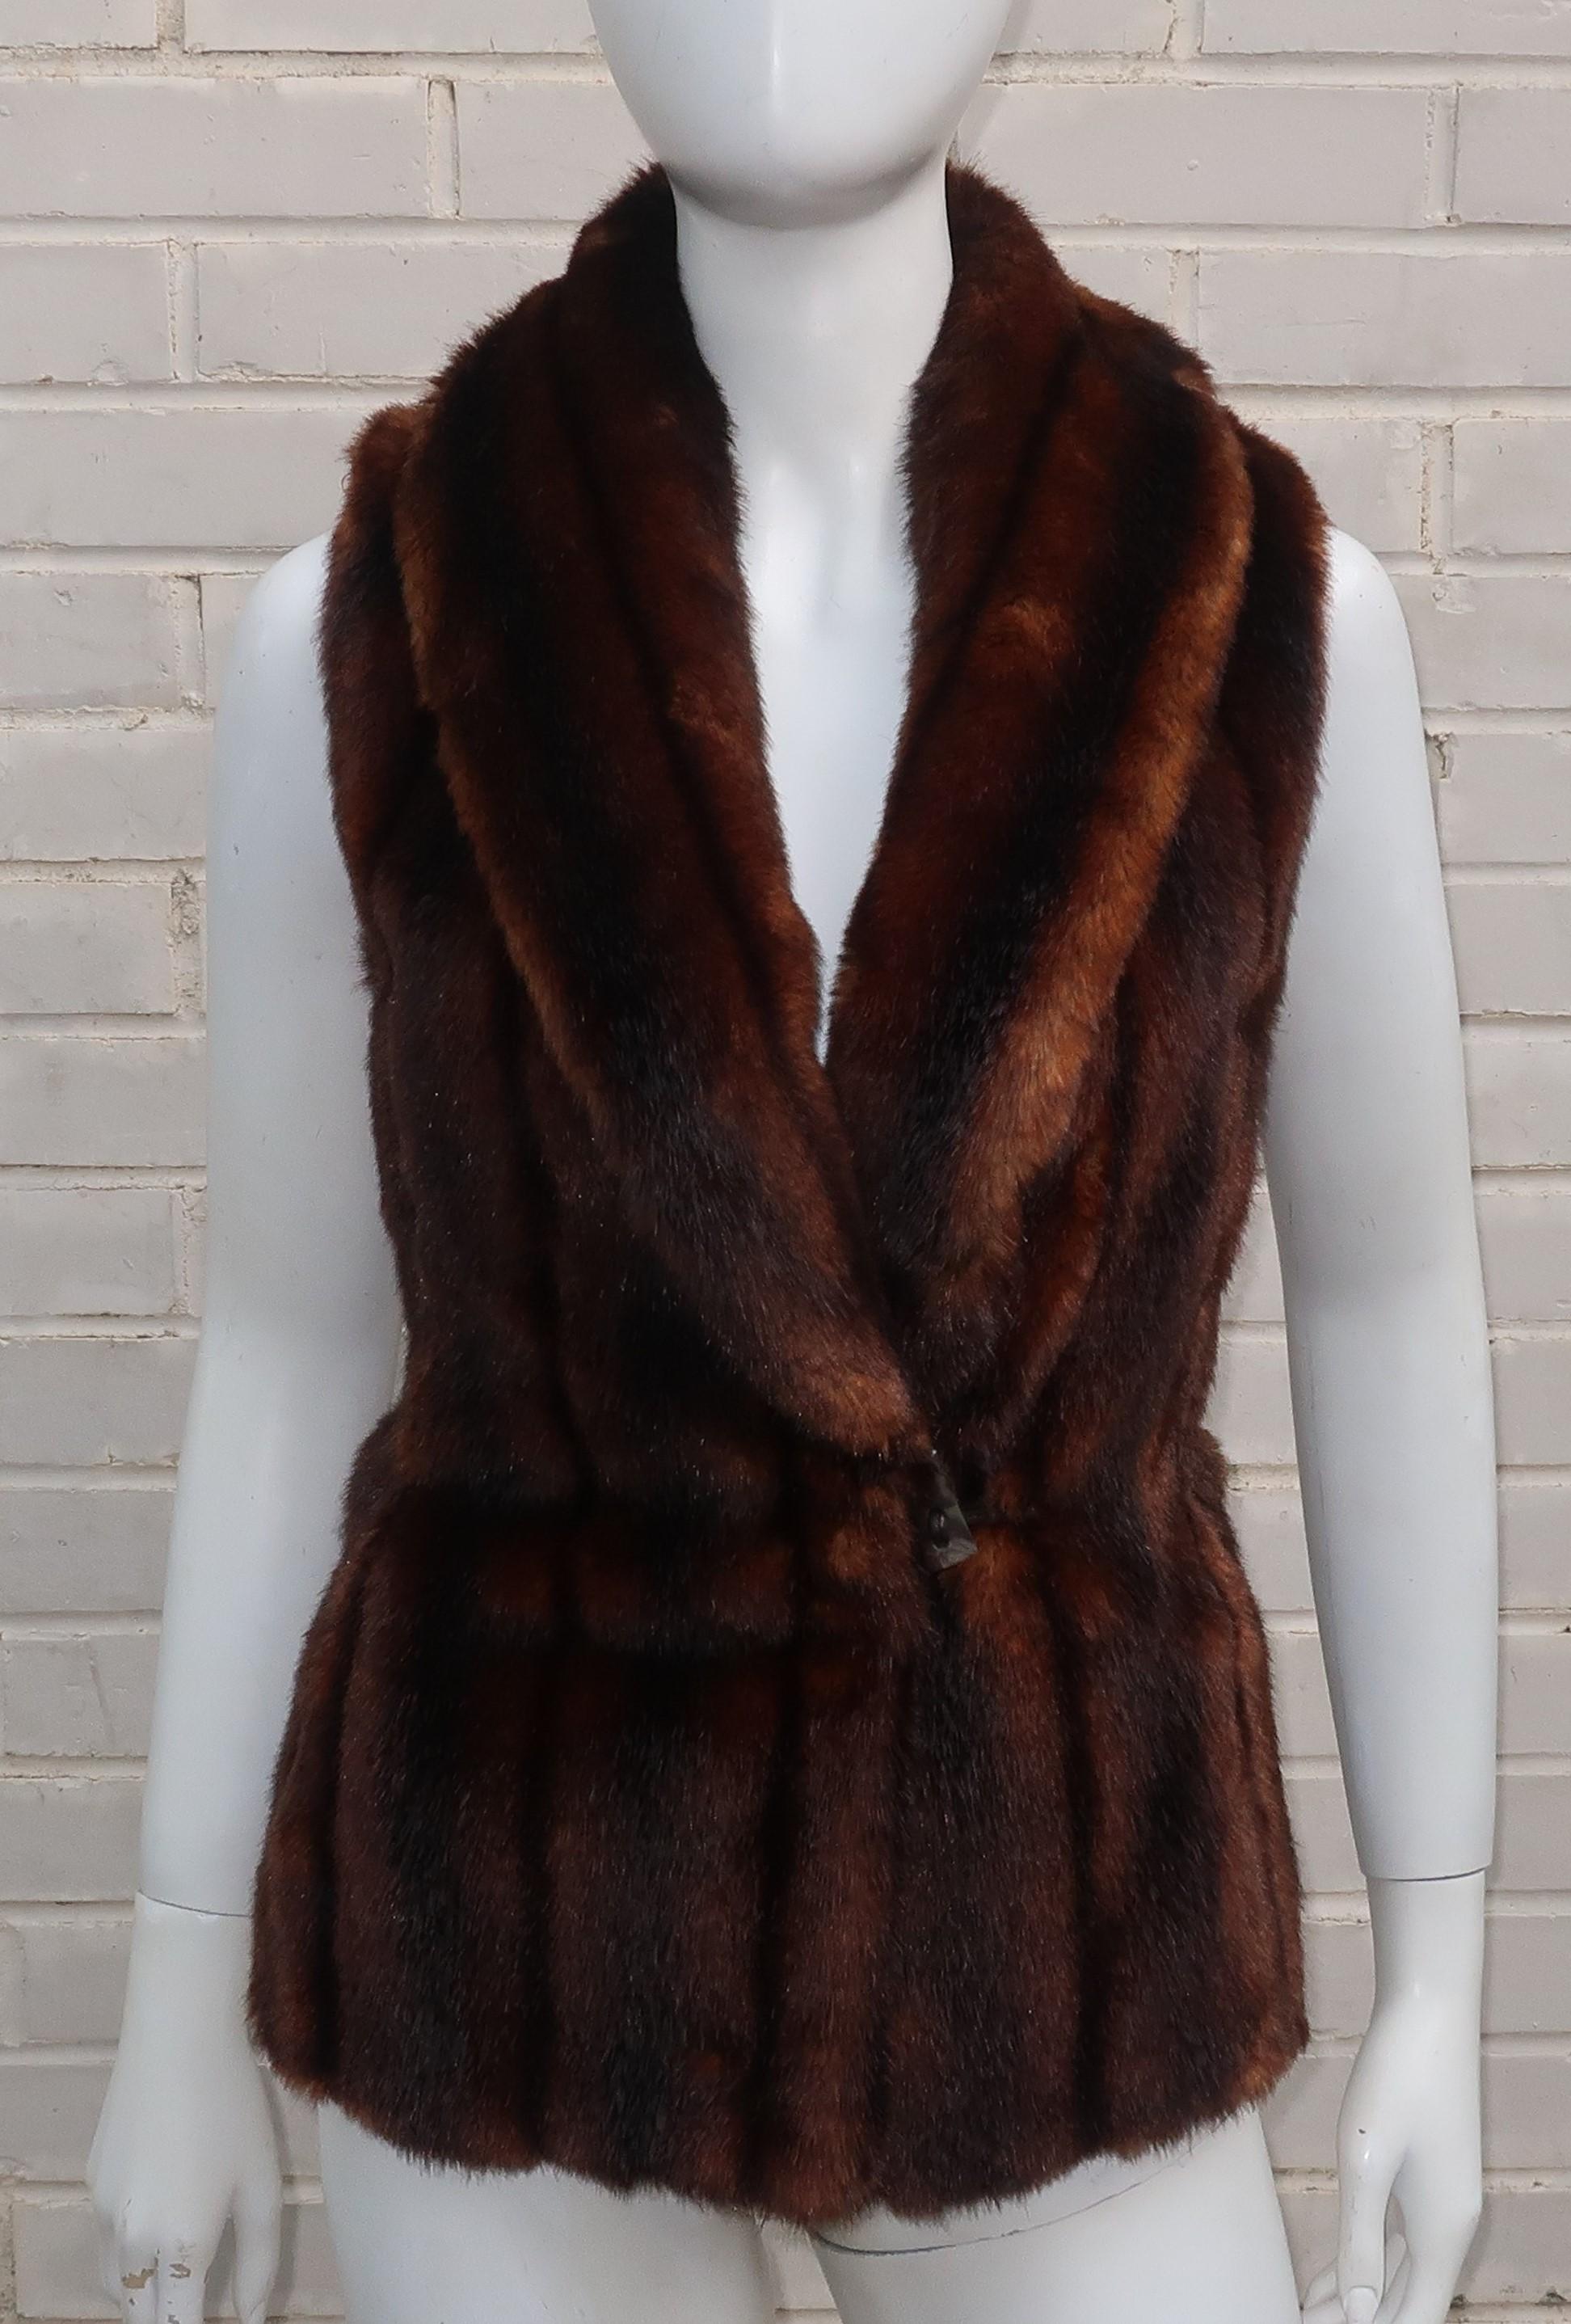 Faux fabulous!  A Lauren label faux brown mink fur vest with a crossover opening, shawl collar and a leather toggle closure accented by a faux horn button.  Fun for everything from jeans to tweeds and woolens.  Acquired from the assets of a Fox